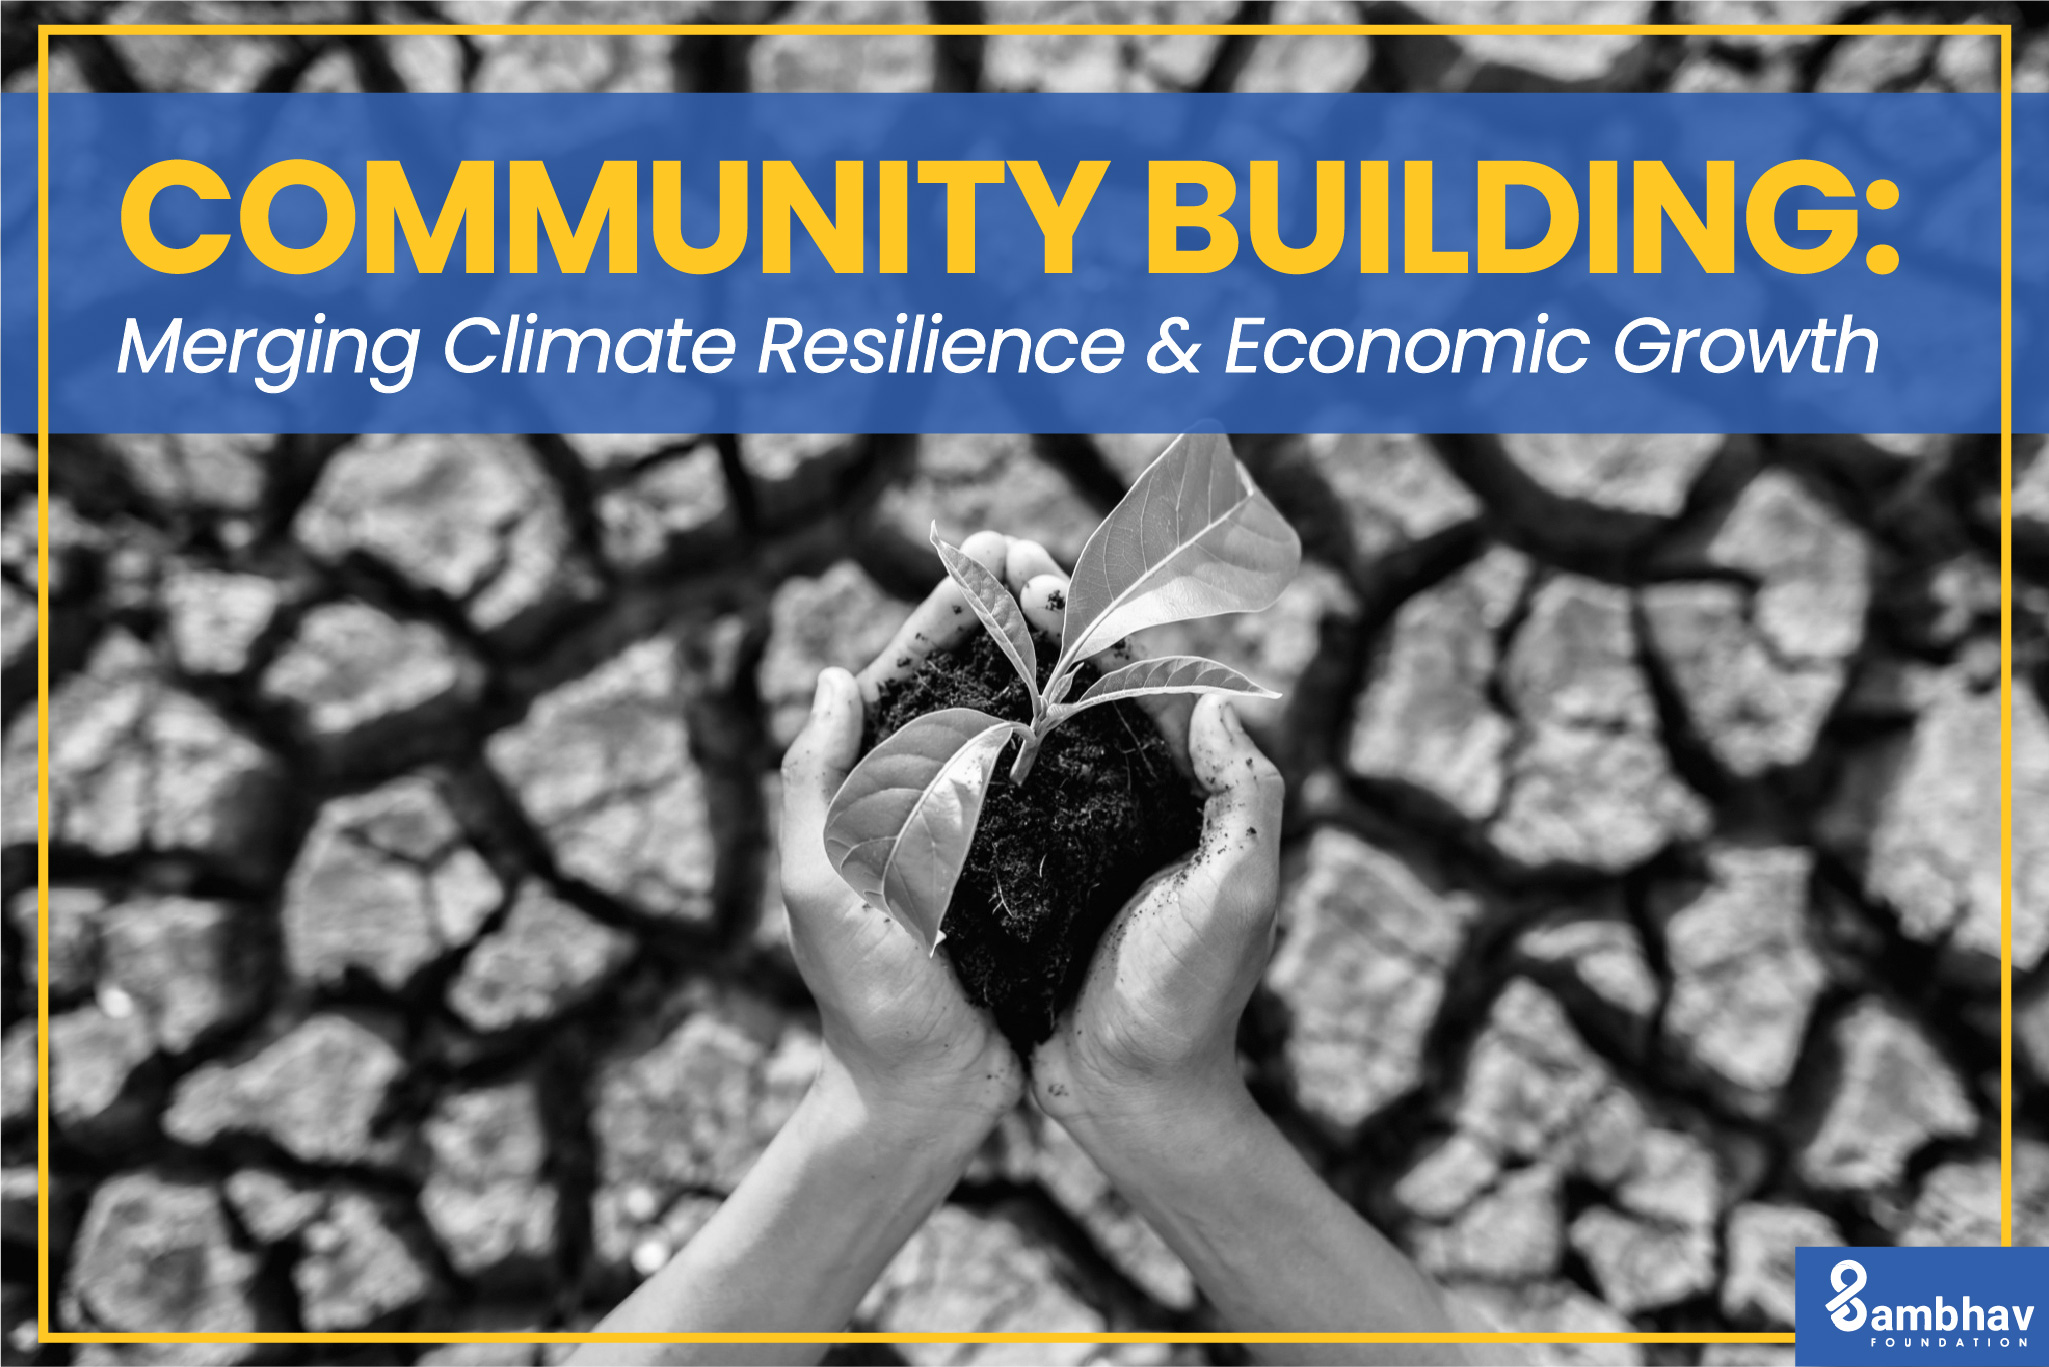 Community Building: Merging Climate Resilience & Economic Growth